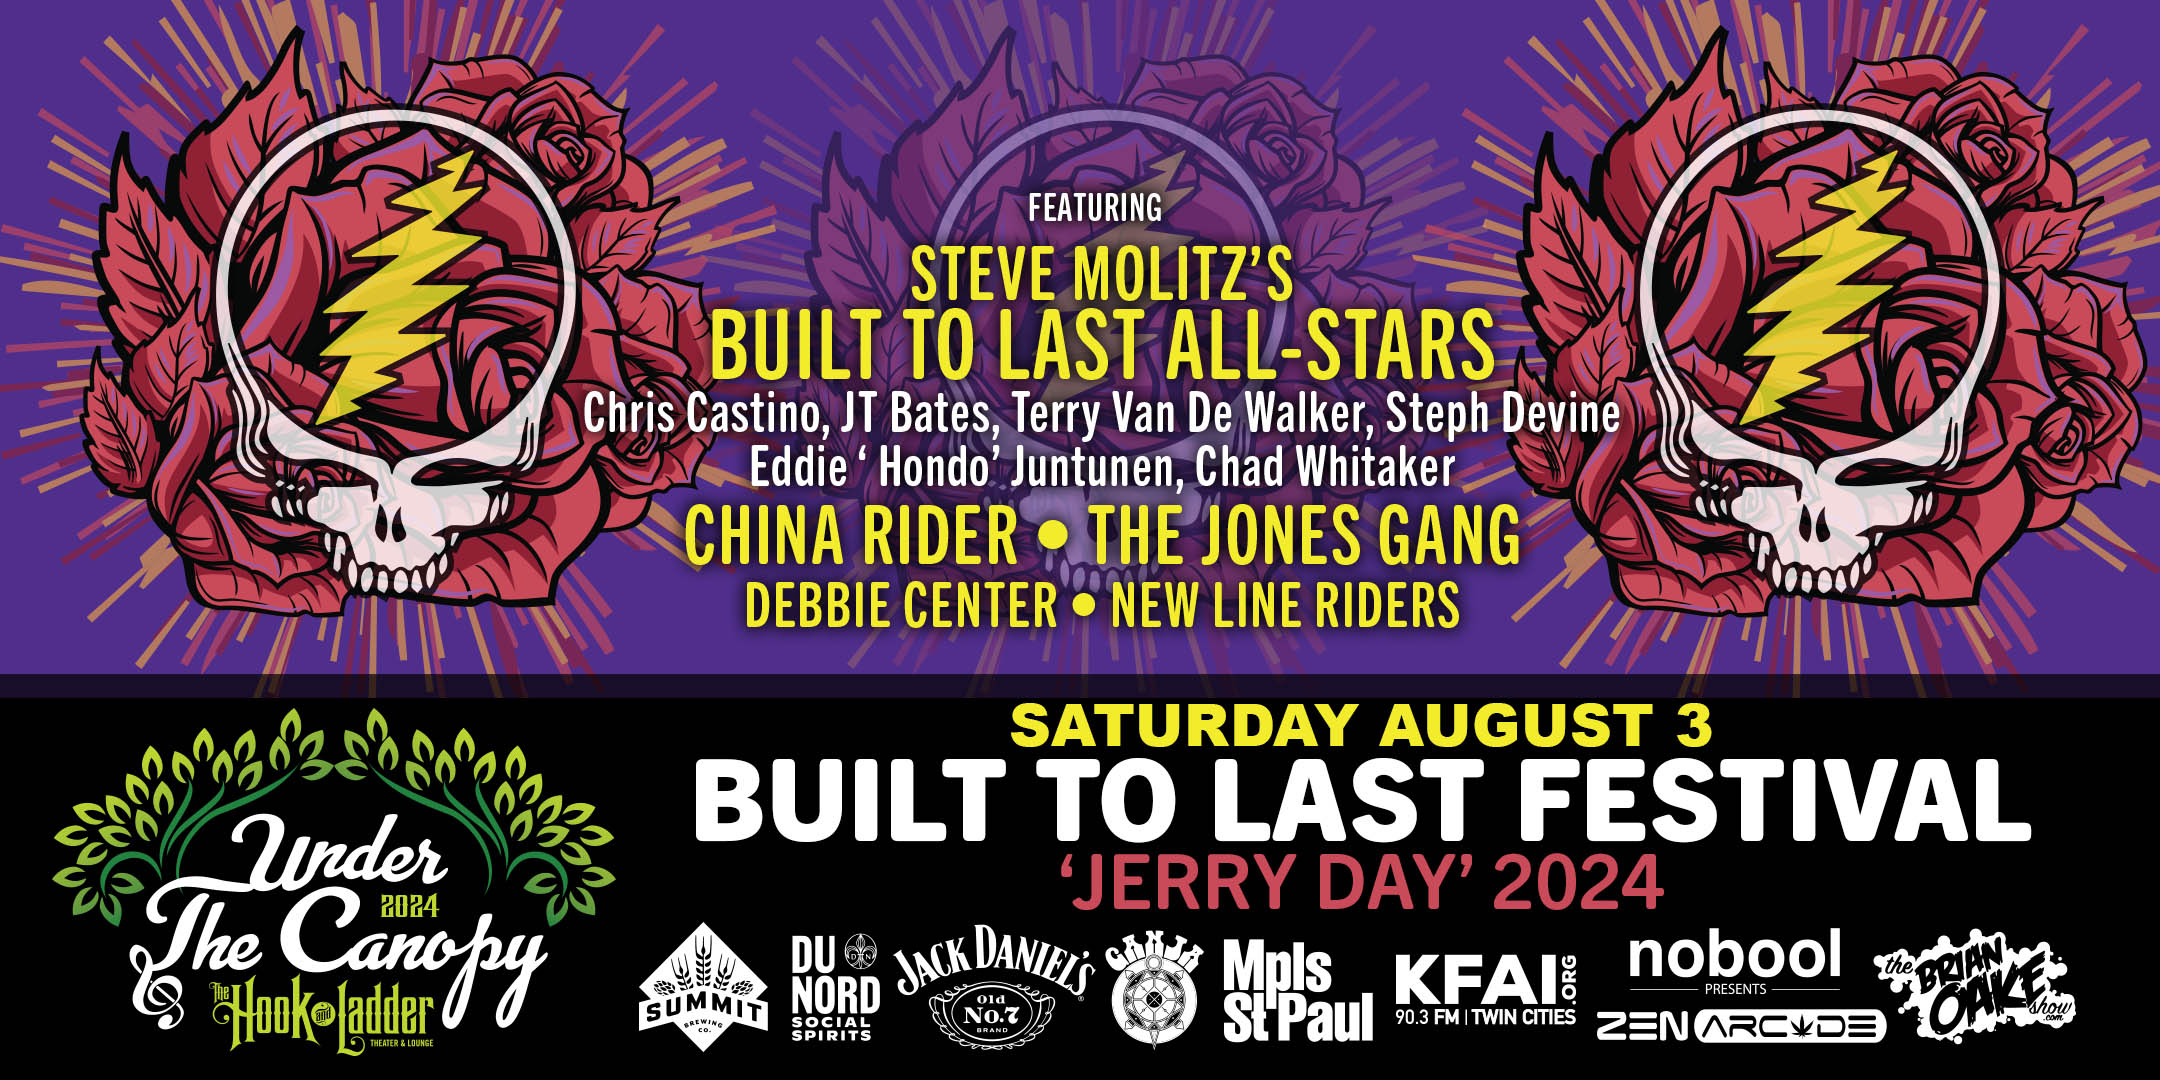 Built To Last Festival 'Jerry Day' 2024 featuring Steve Molitz's BUILT TO LAST ALL-STARS Steve Molitz (Phil & Friends / Particle), Terry VanDeWalker (Big Wu), JT Bates (Big Red Machine), Chris Castino (Big Wu), Steph Devine (Steeling Dan / MJAS), Eddie “Hondo” Juntunen (WIB /MJAS), Chad Whittaker (Kung Fu Hippies) with China Rider, The Jones Gang, Debbie Center, & New Line Riders Saturday, August 3 Under The Canopy at The Hook and Ladder Theater "An Urban Outdoor Summer Concert Series" Doors 5:00pm :: Music 5:30pm :: 21+ GA Early Early - $15 (Until Line-up Announcement) GA Early - $20 (Thru June) GA Advance - $25 GA Day of Show - $30